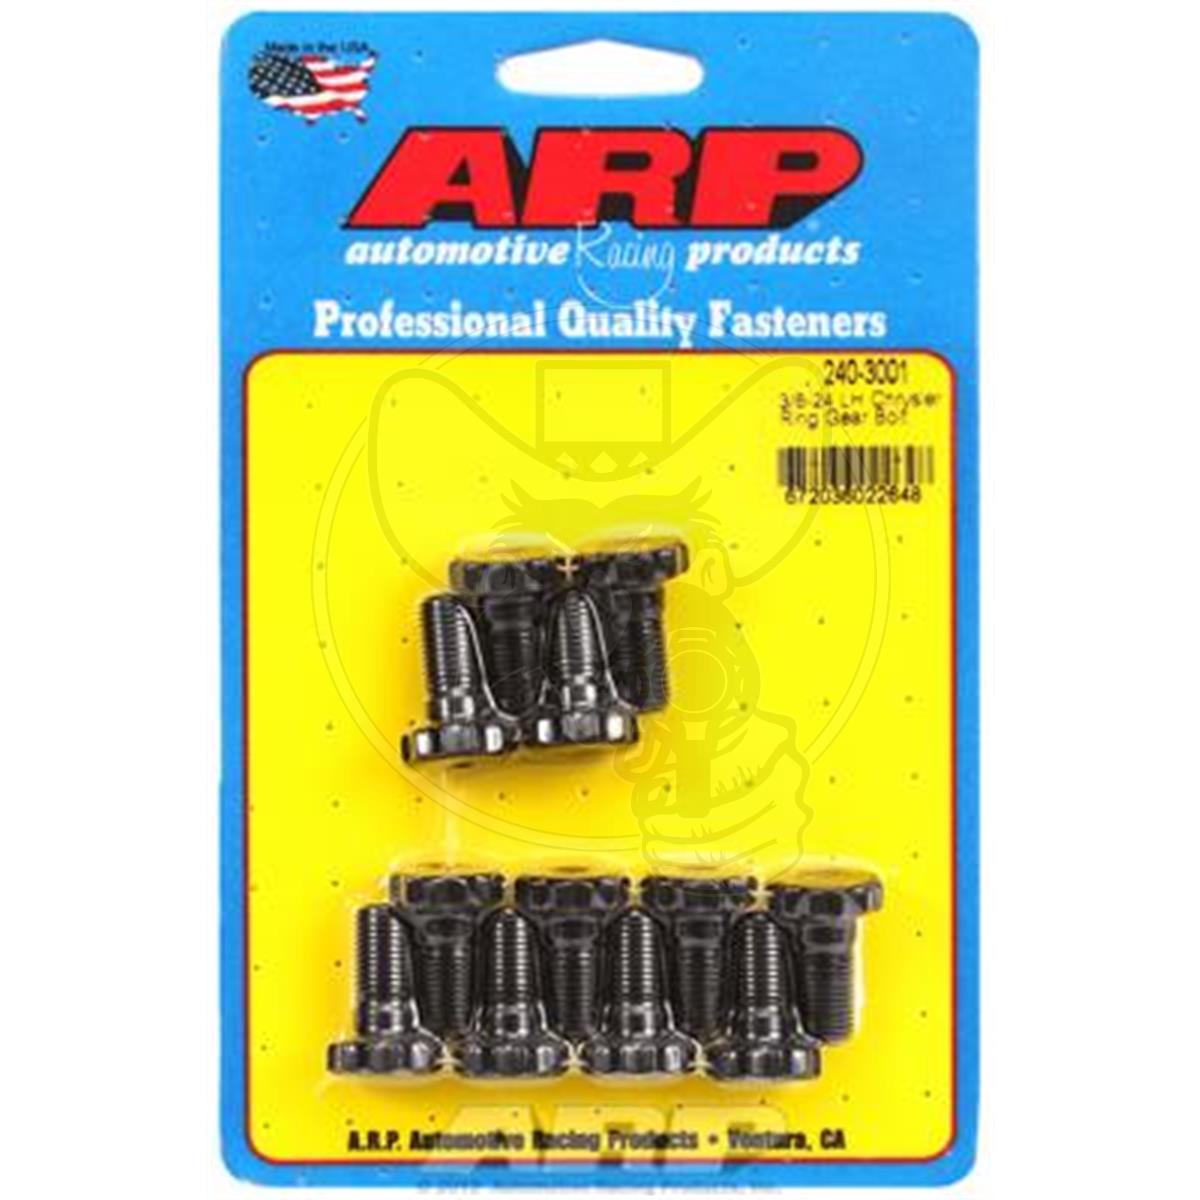 ARP DIFFERENTIAL CROWN WHEEL BOLTS FITS CHRYSLER 1982 & EARLIER 7.1/4" & 8.3/4"